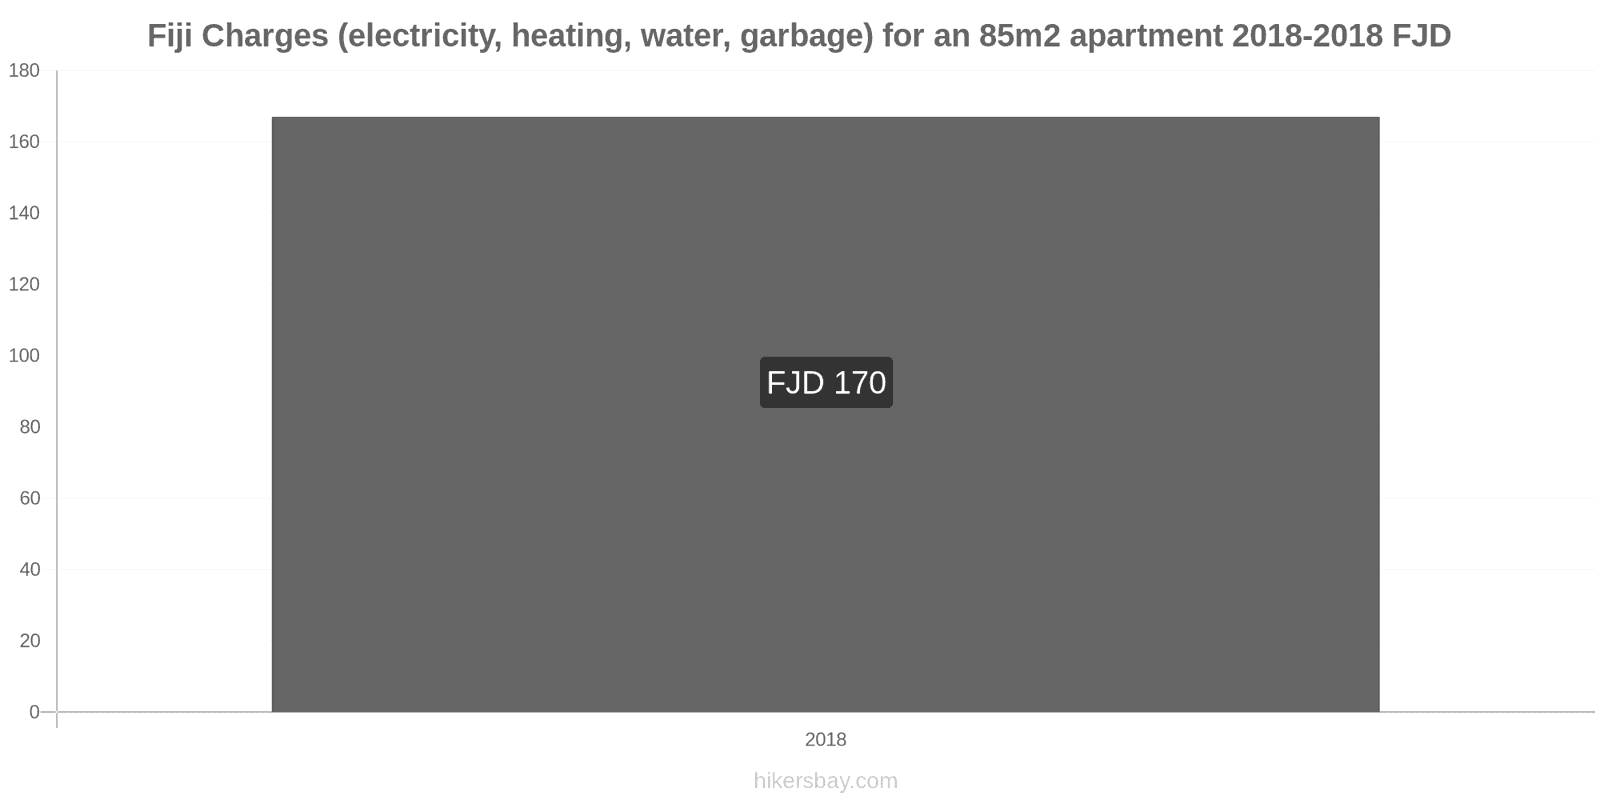 Fiji price changes Utilities (electricity, heating, water, garbage) for an 85m2 apartment hikersbay.com